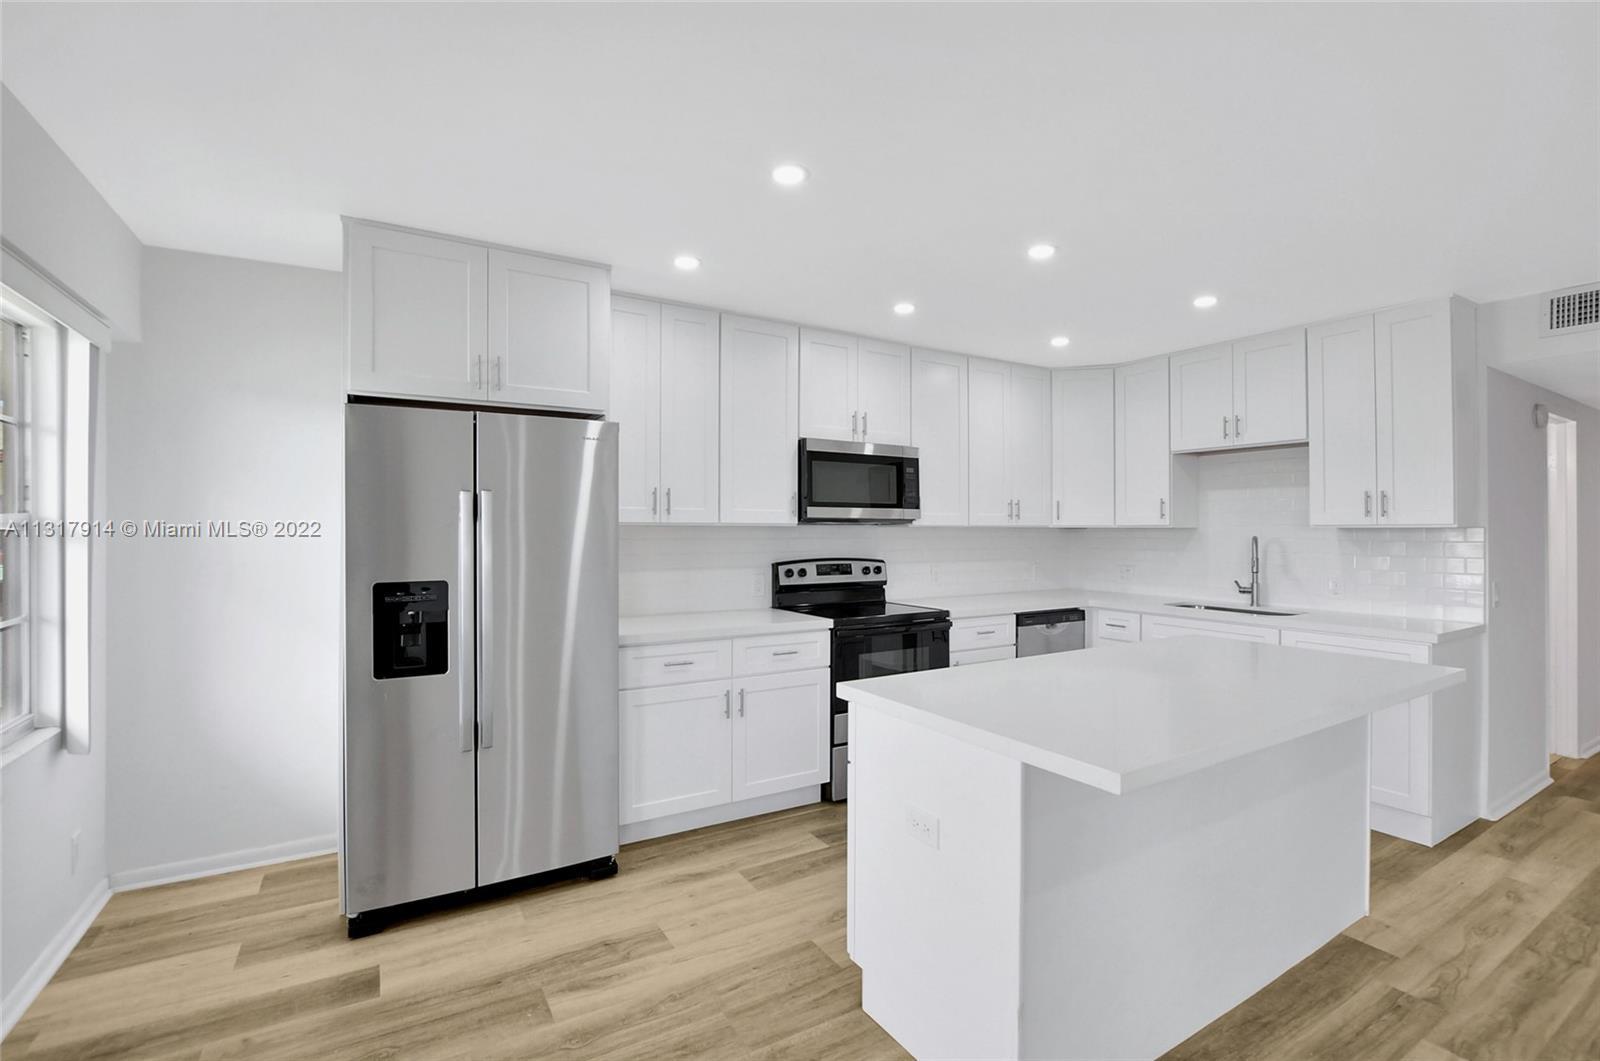 Fully remodeled 2Bed, 1.5 Bath condo. The heart of this condo is a gourmet chefs kitchen with top of